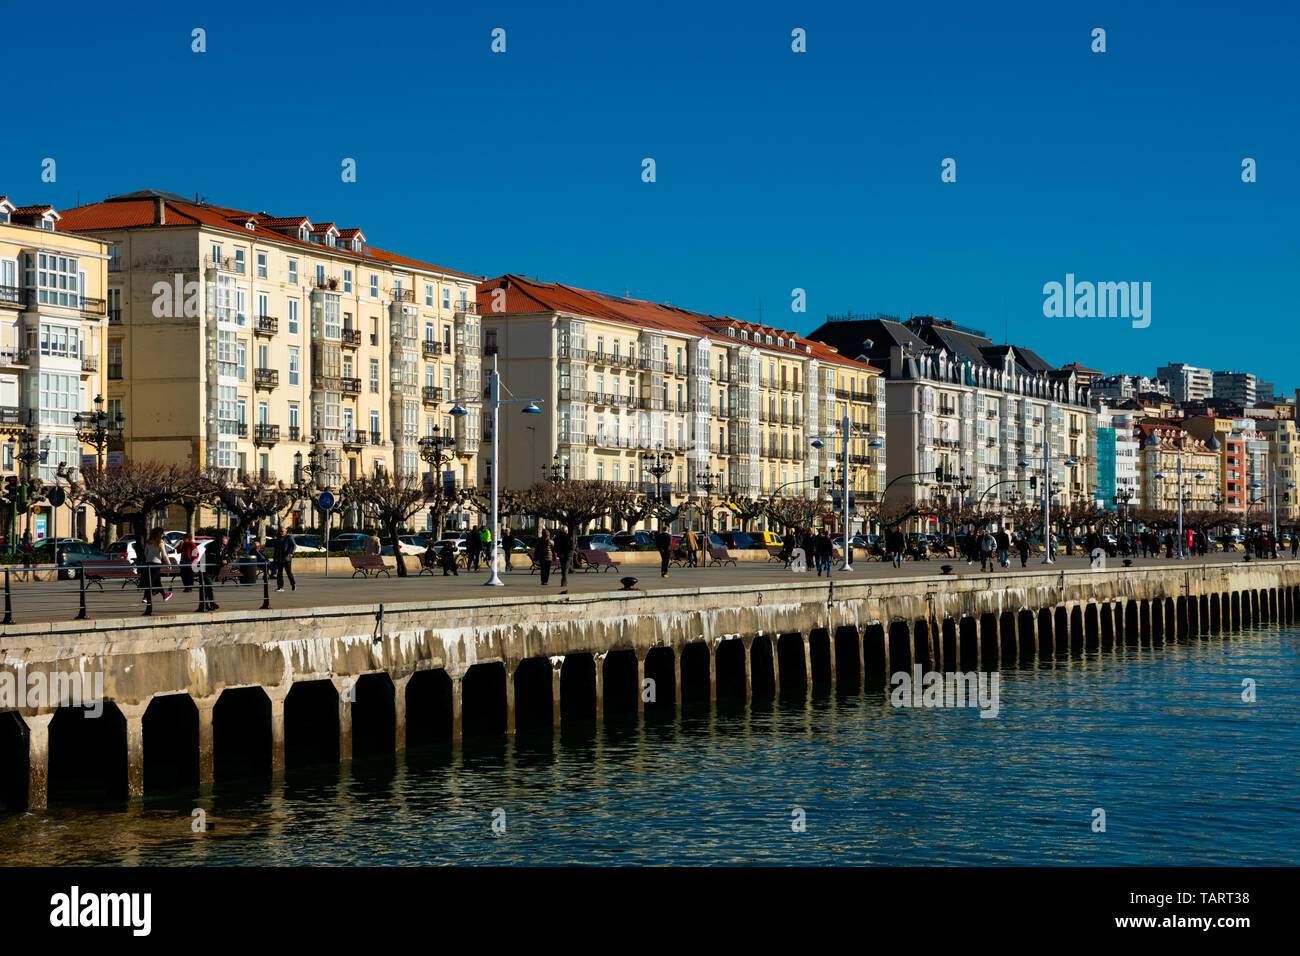 Santander city aerial panoramic view. Santander is the capital of the  Cantabria region in Spain Stock Photo - Alamy